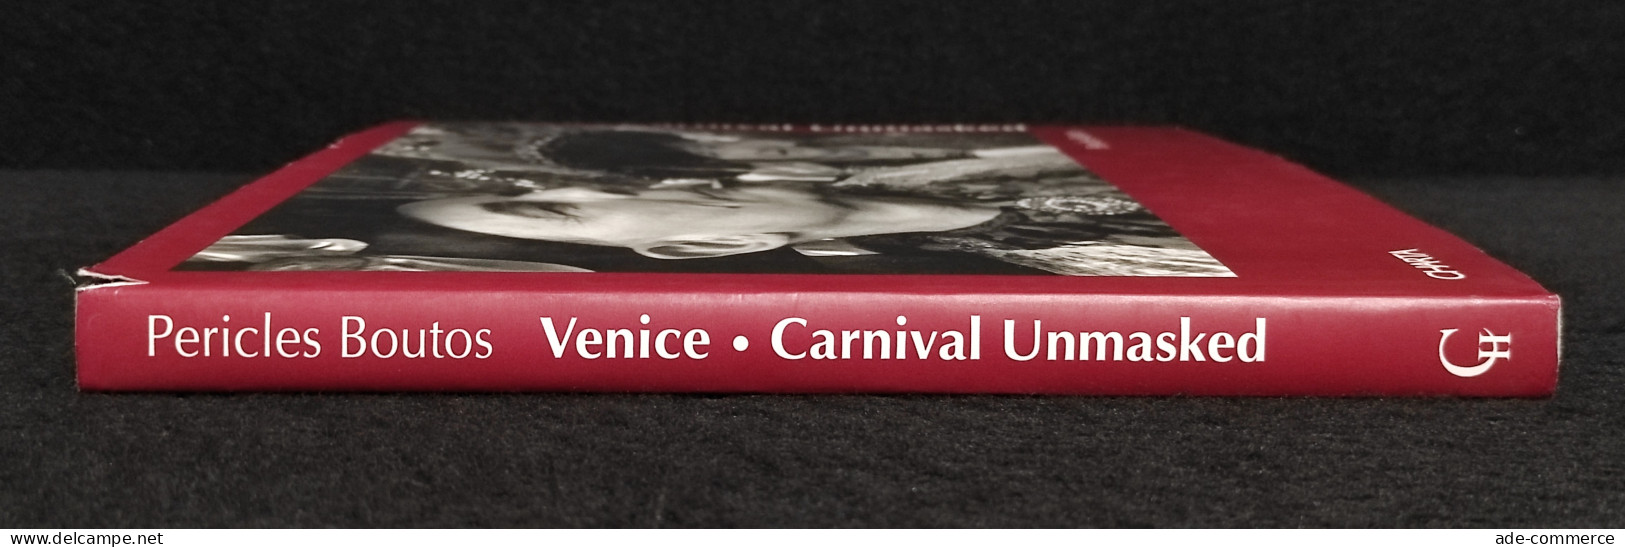 Venice-Carnival Unmasked - Pericles Boutos - Charta - 1998